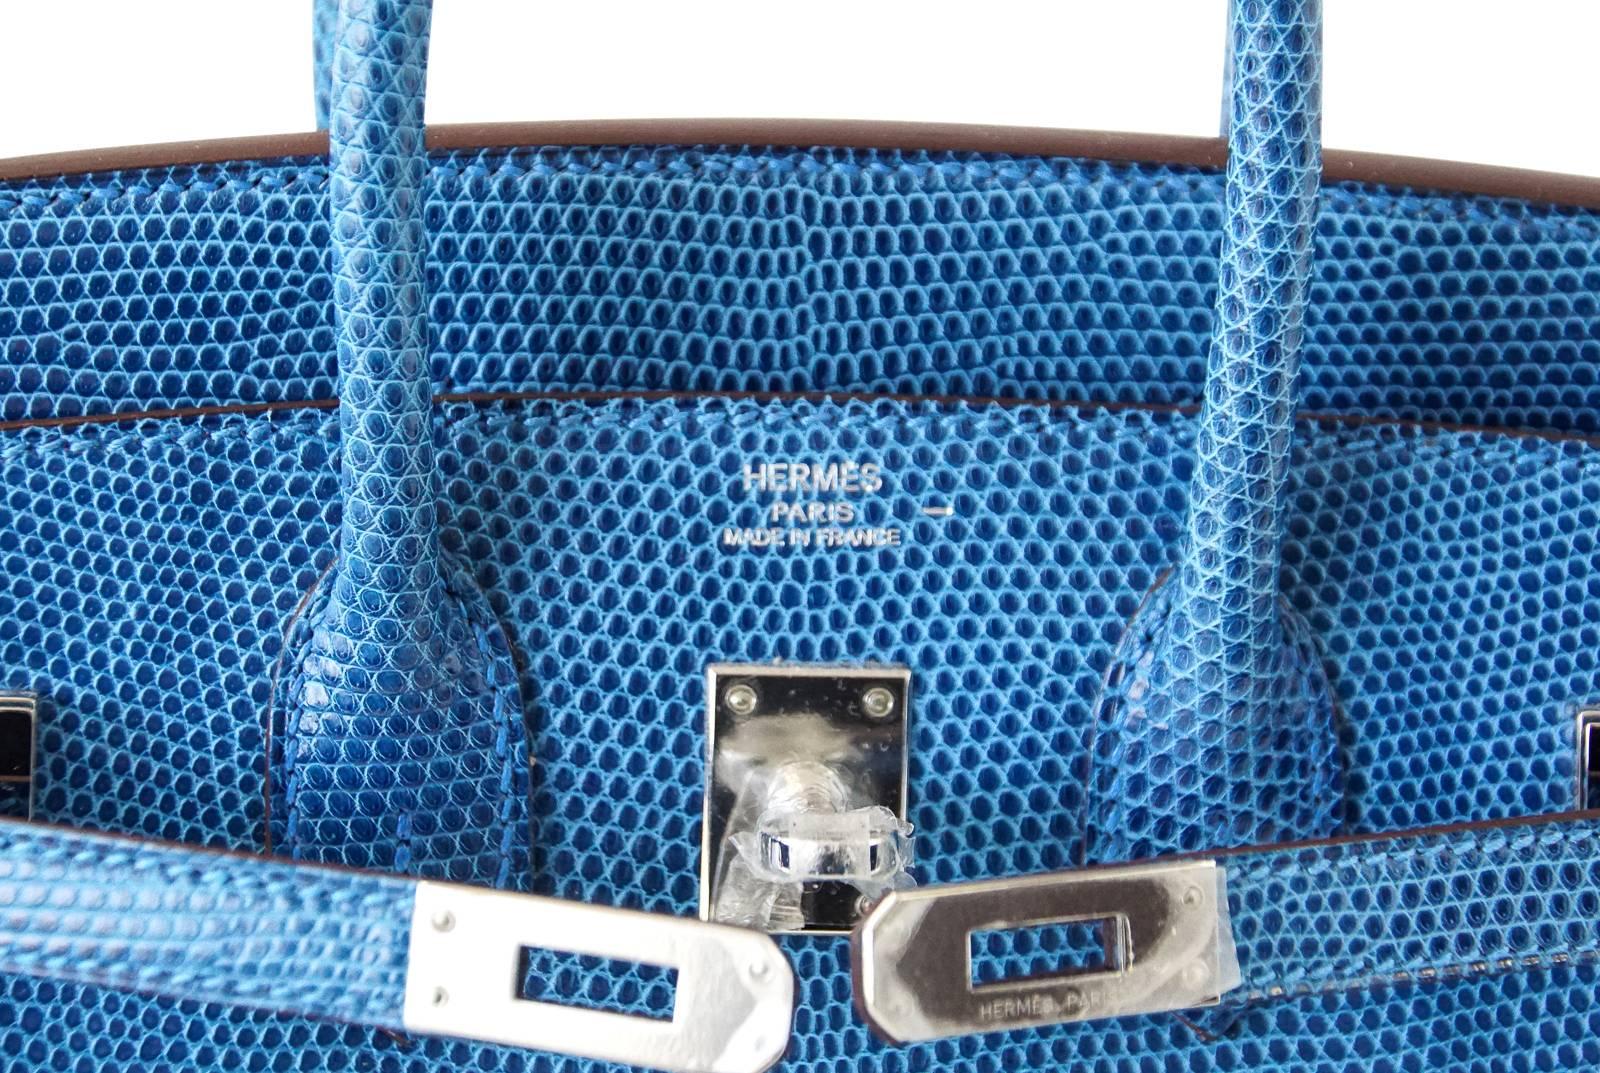 Guaranteed authentic Hermes Birkin 25 bag in Mykonos Lizard. 
Breathtakingly beautiful this is now the rarest of skins. 
And in the most beautiful Mediterranean blue.
Comes with lock, keys, clochette, sleeper, and raincoat.
final sale 

BAG